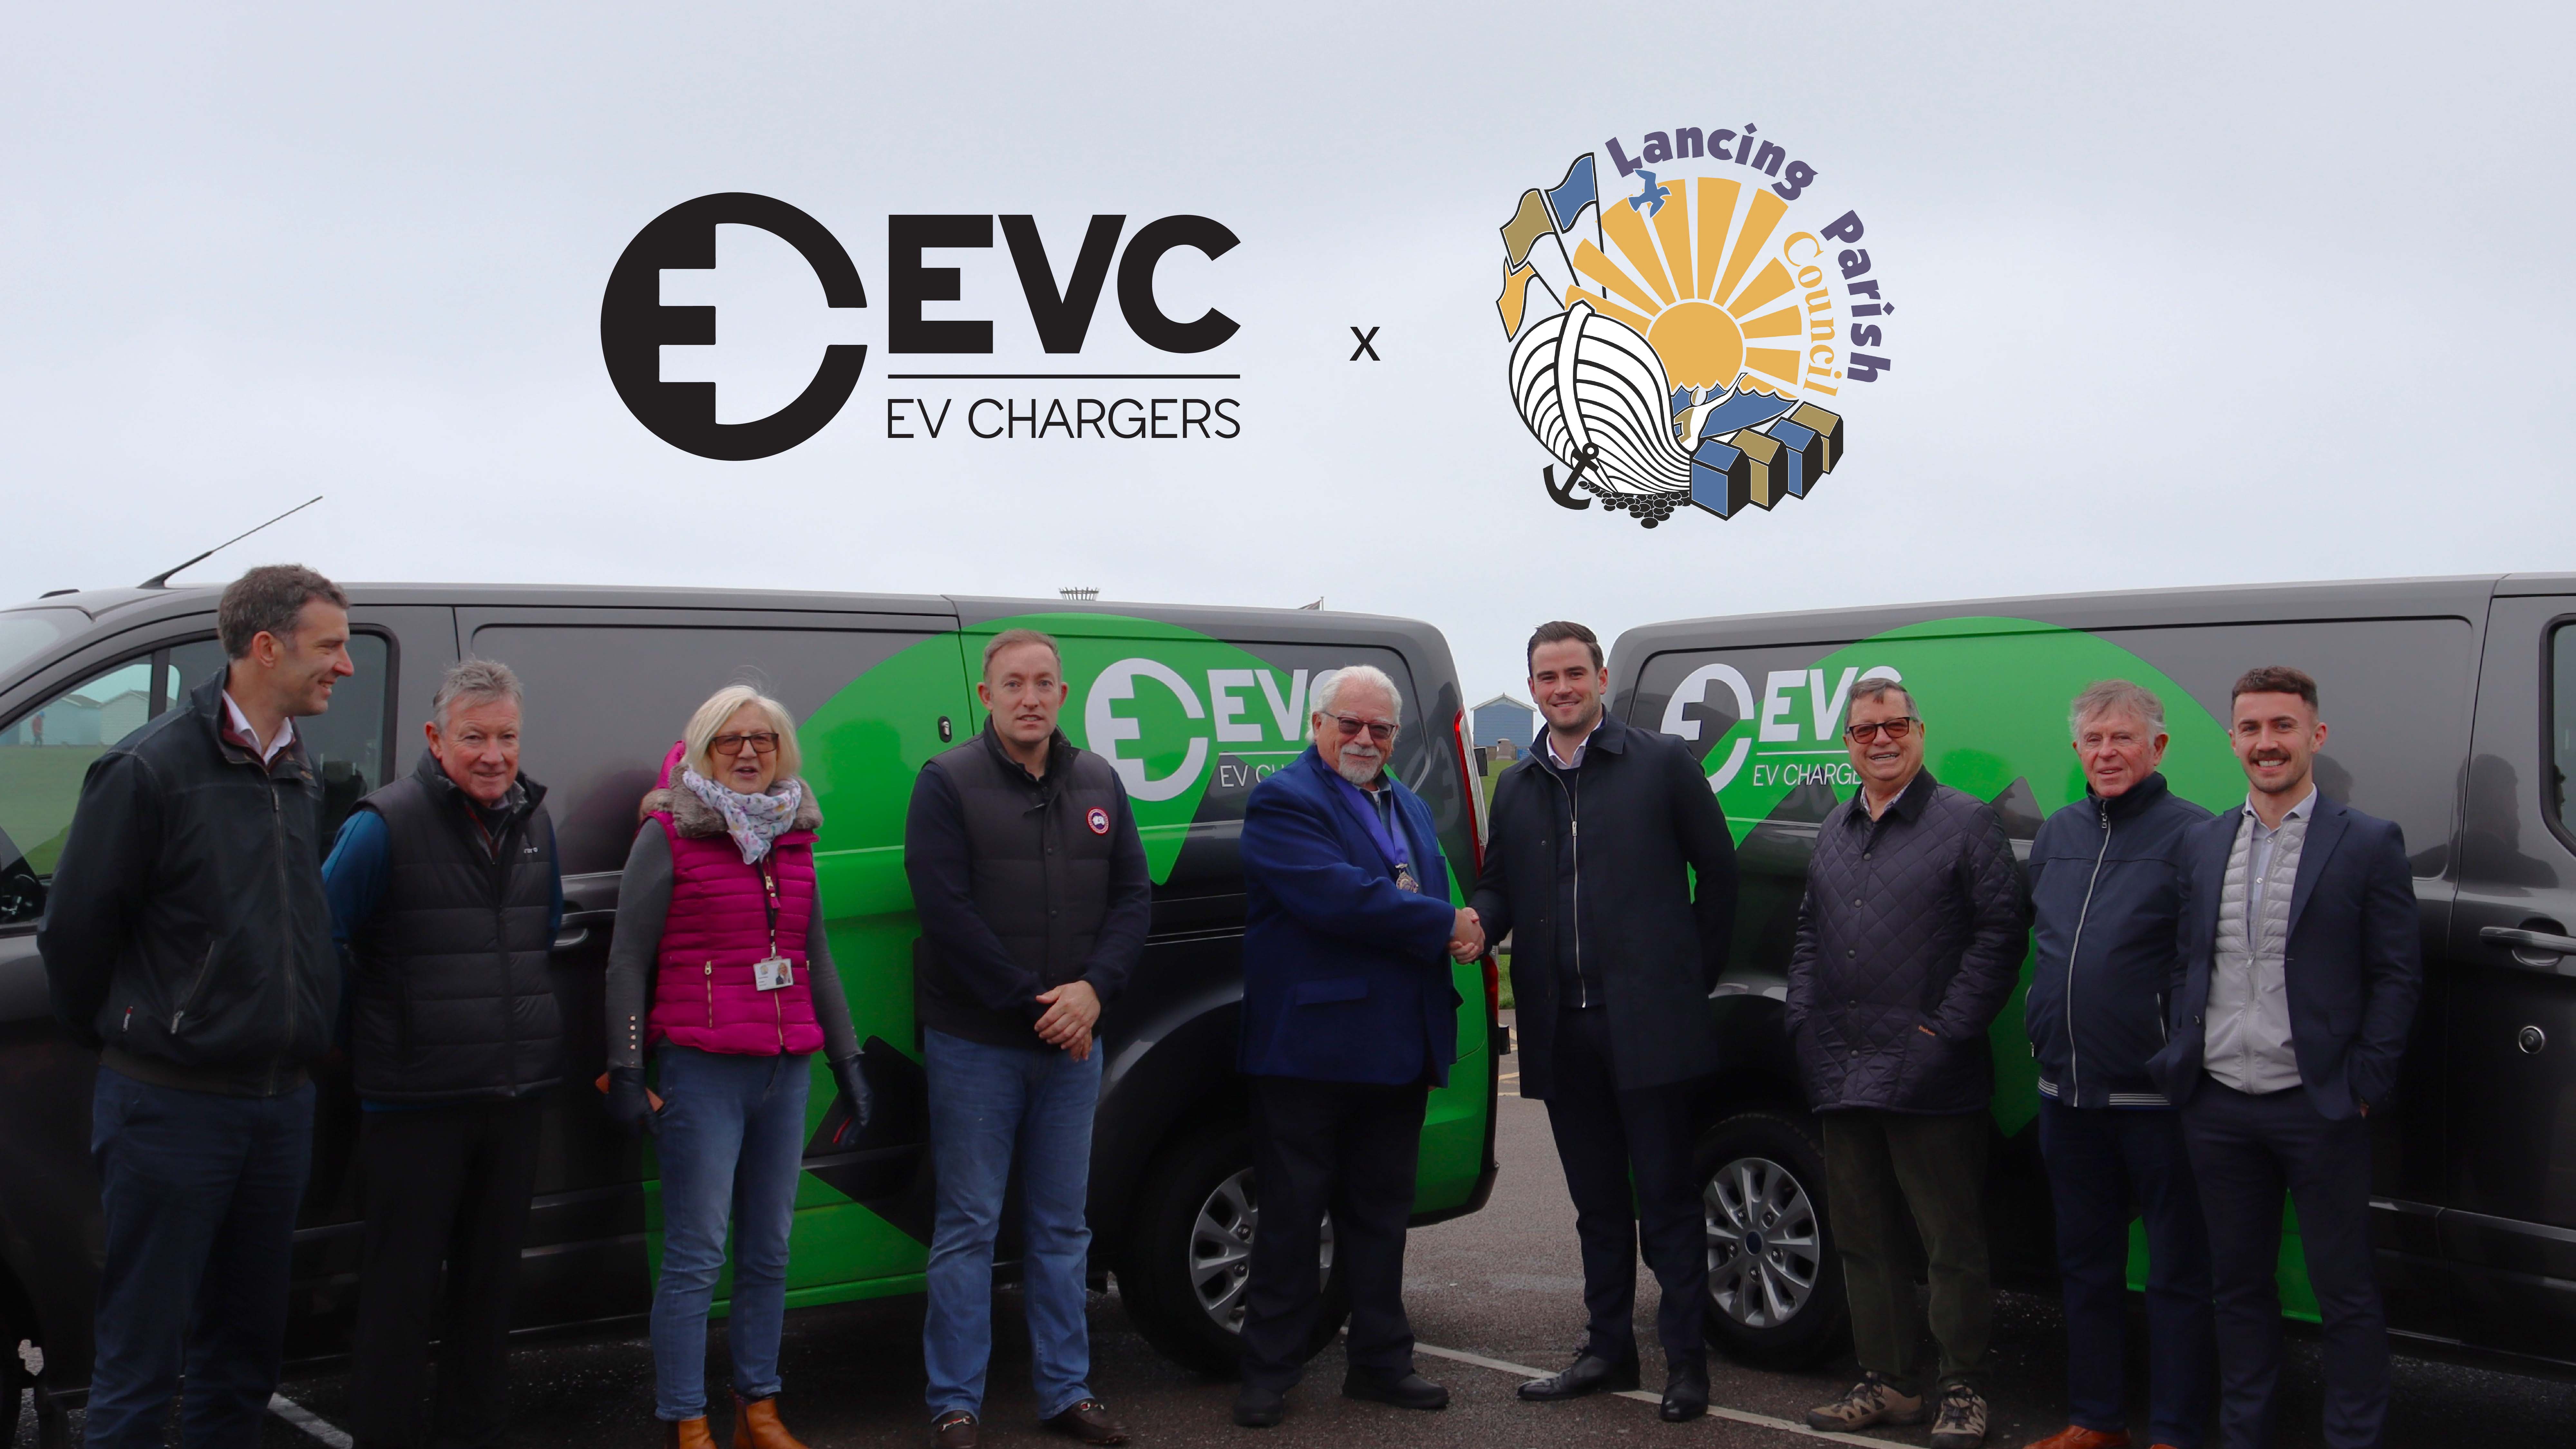 EVC partners with Lancing Parish Council to fast track the roll out of EV charge points in Lancing